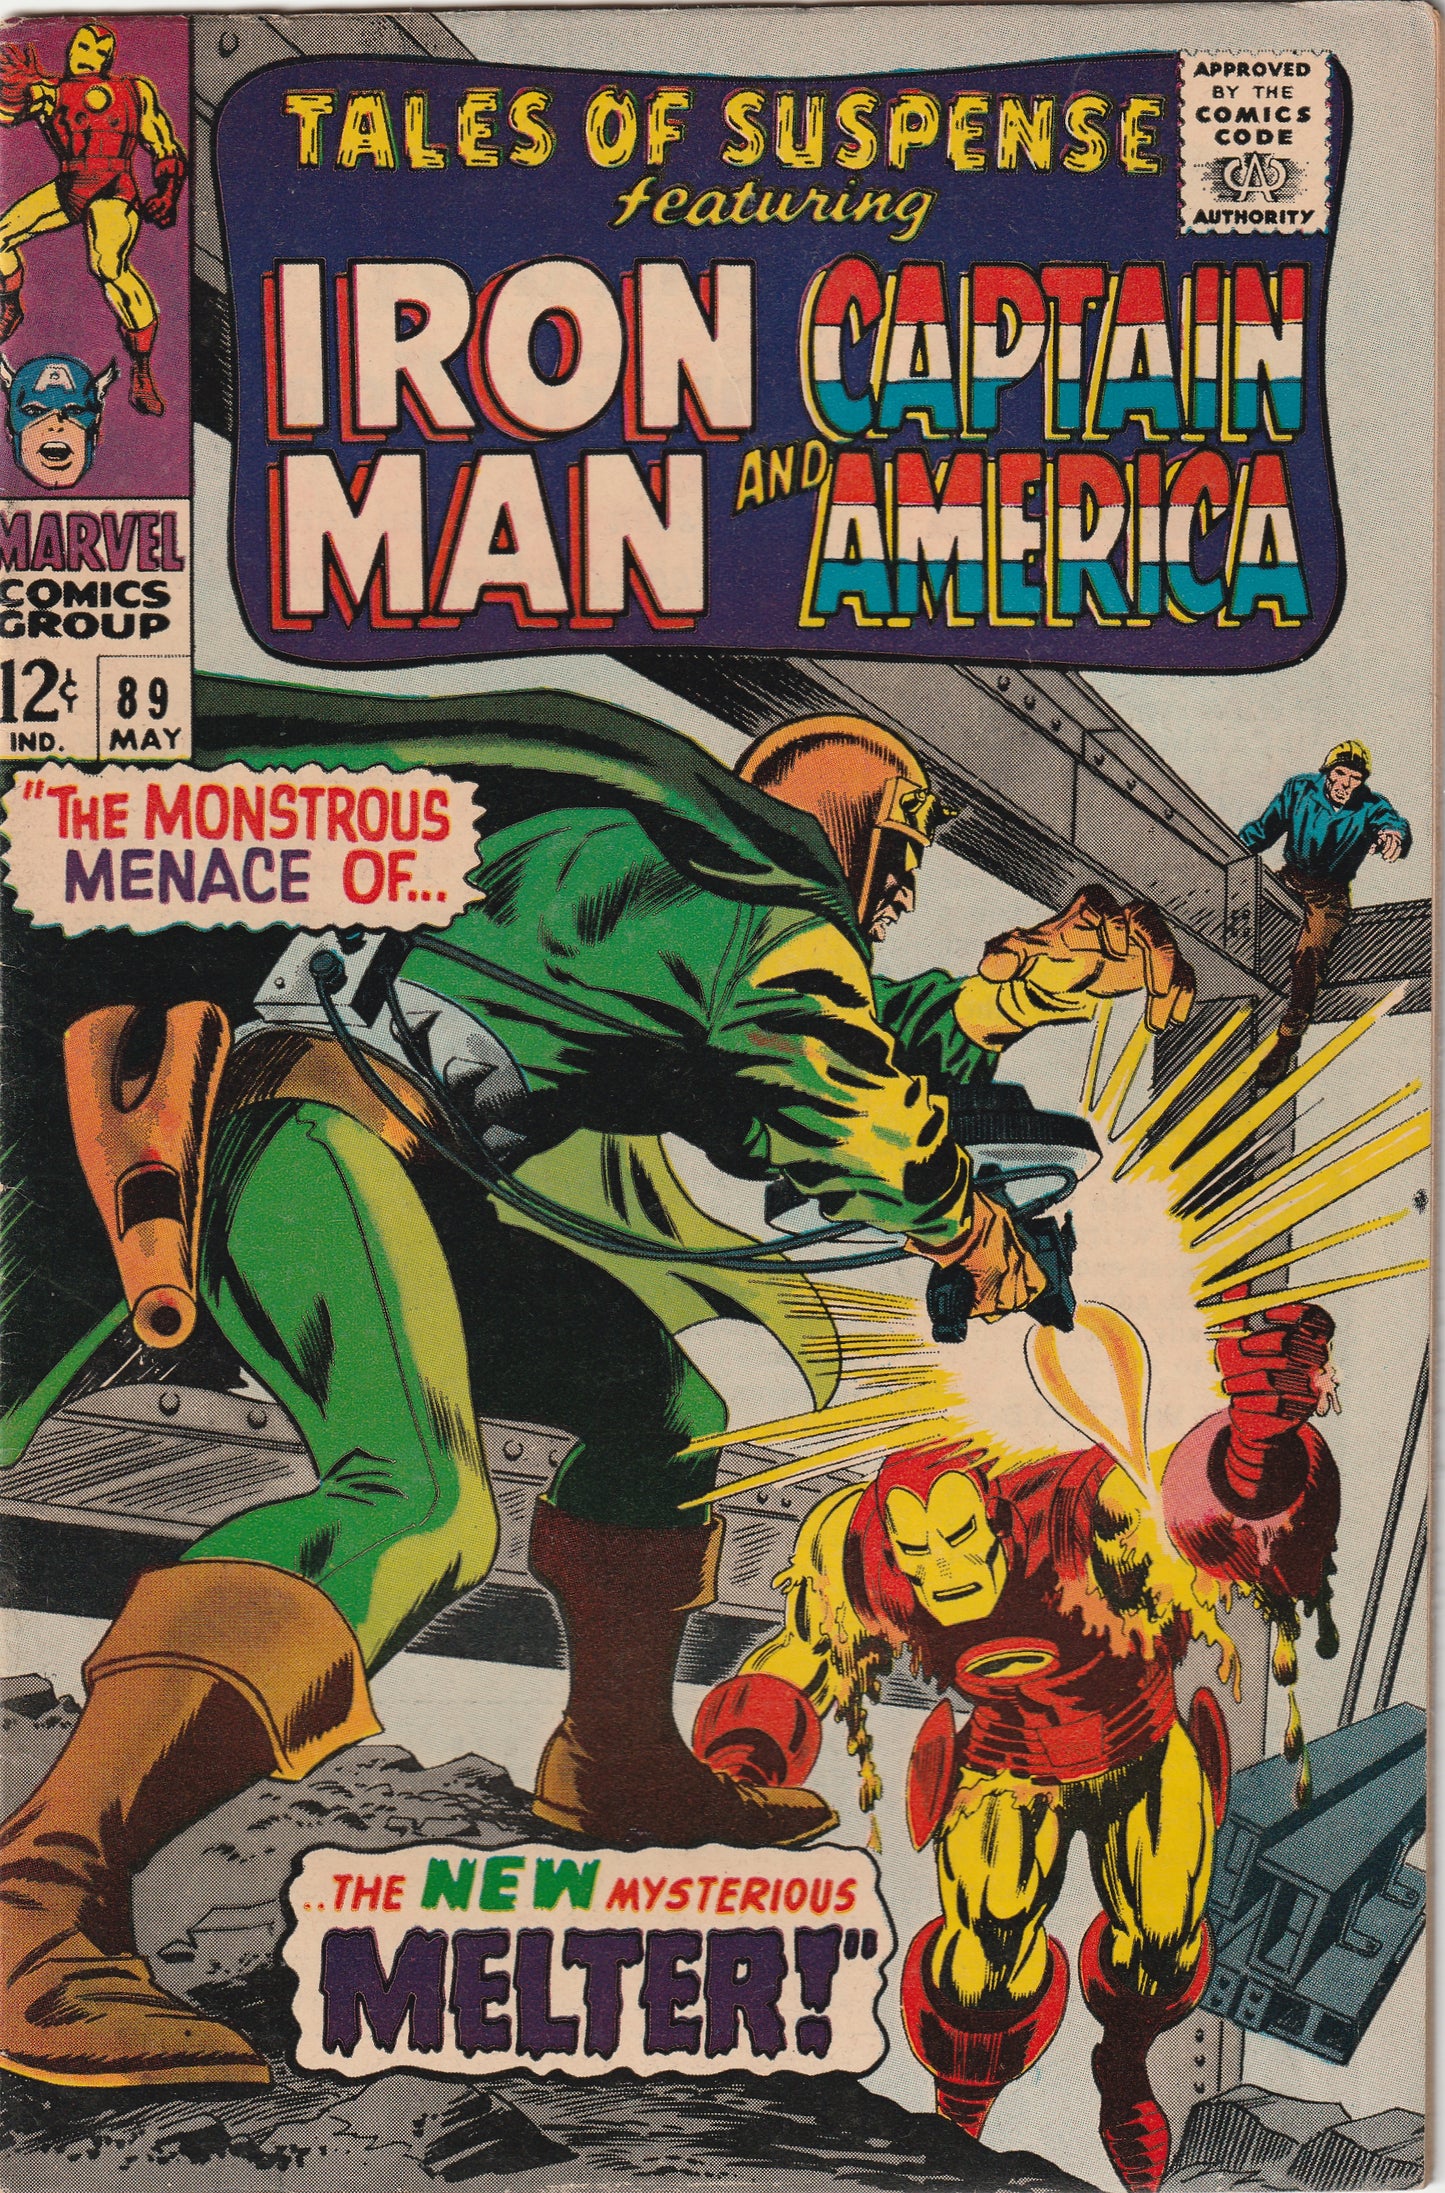 Tales of Suspense #89 (1967) - Featuring Iron Man and Captain America